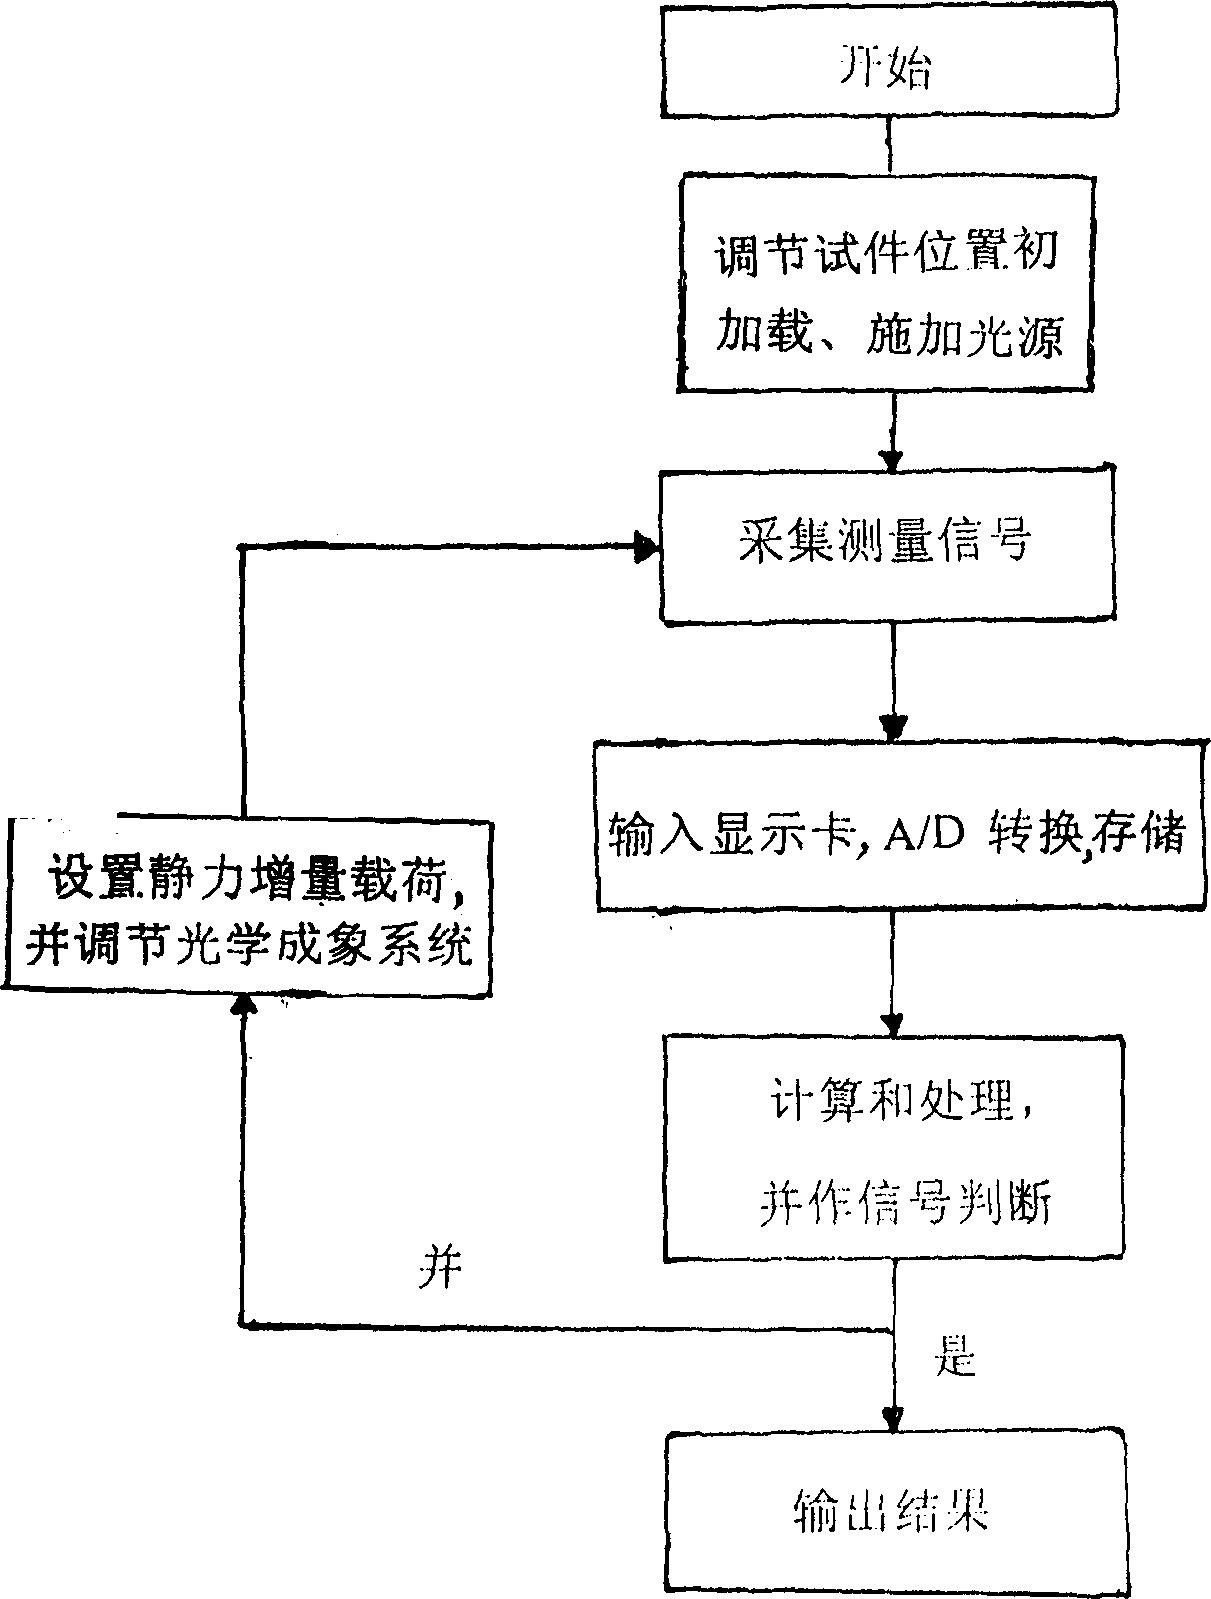 Static force loading measuring and controlling equipment for material microstructure tester and its method